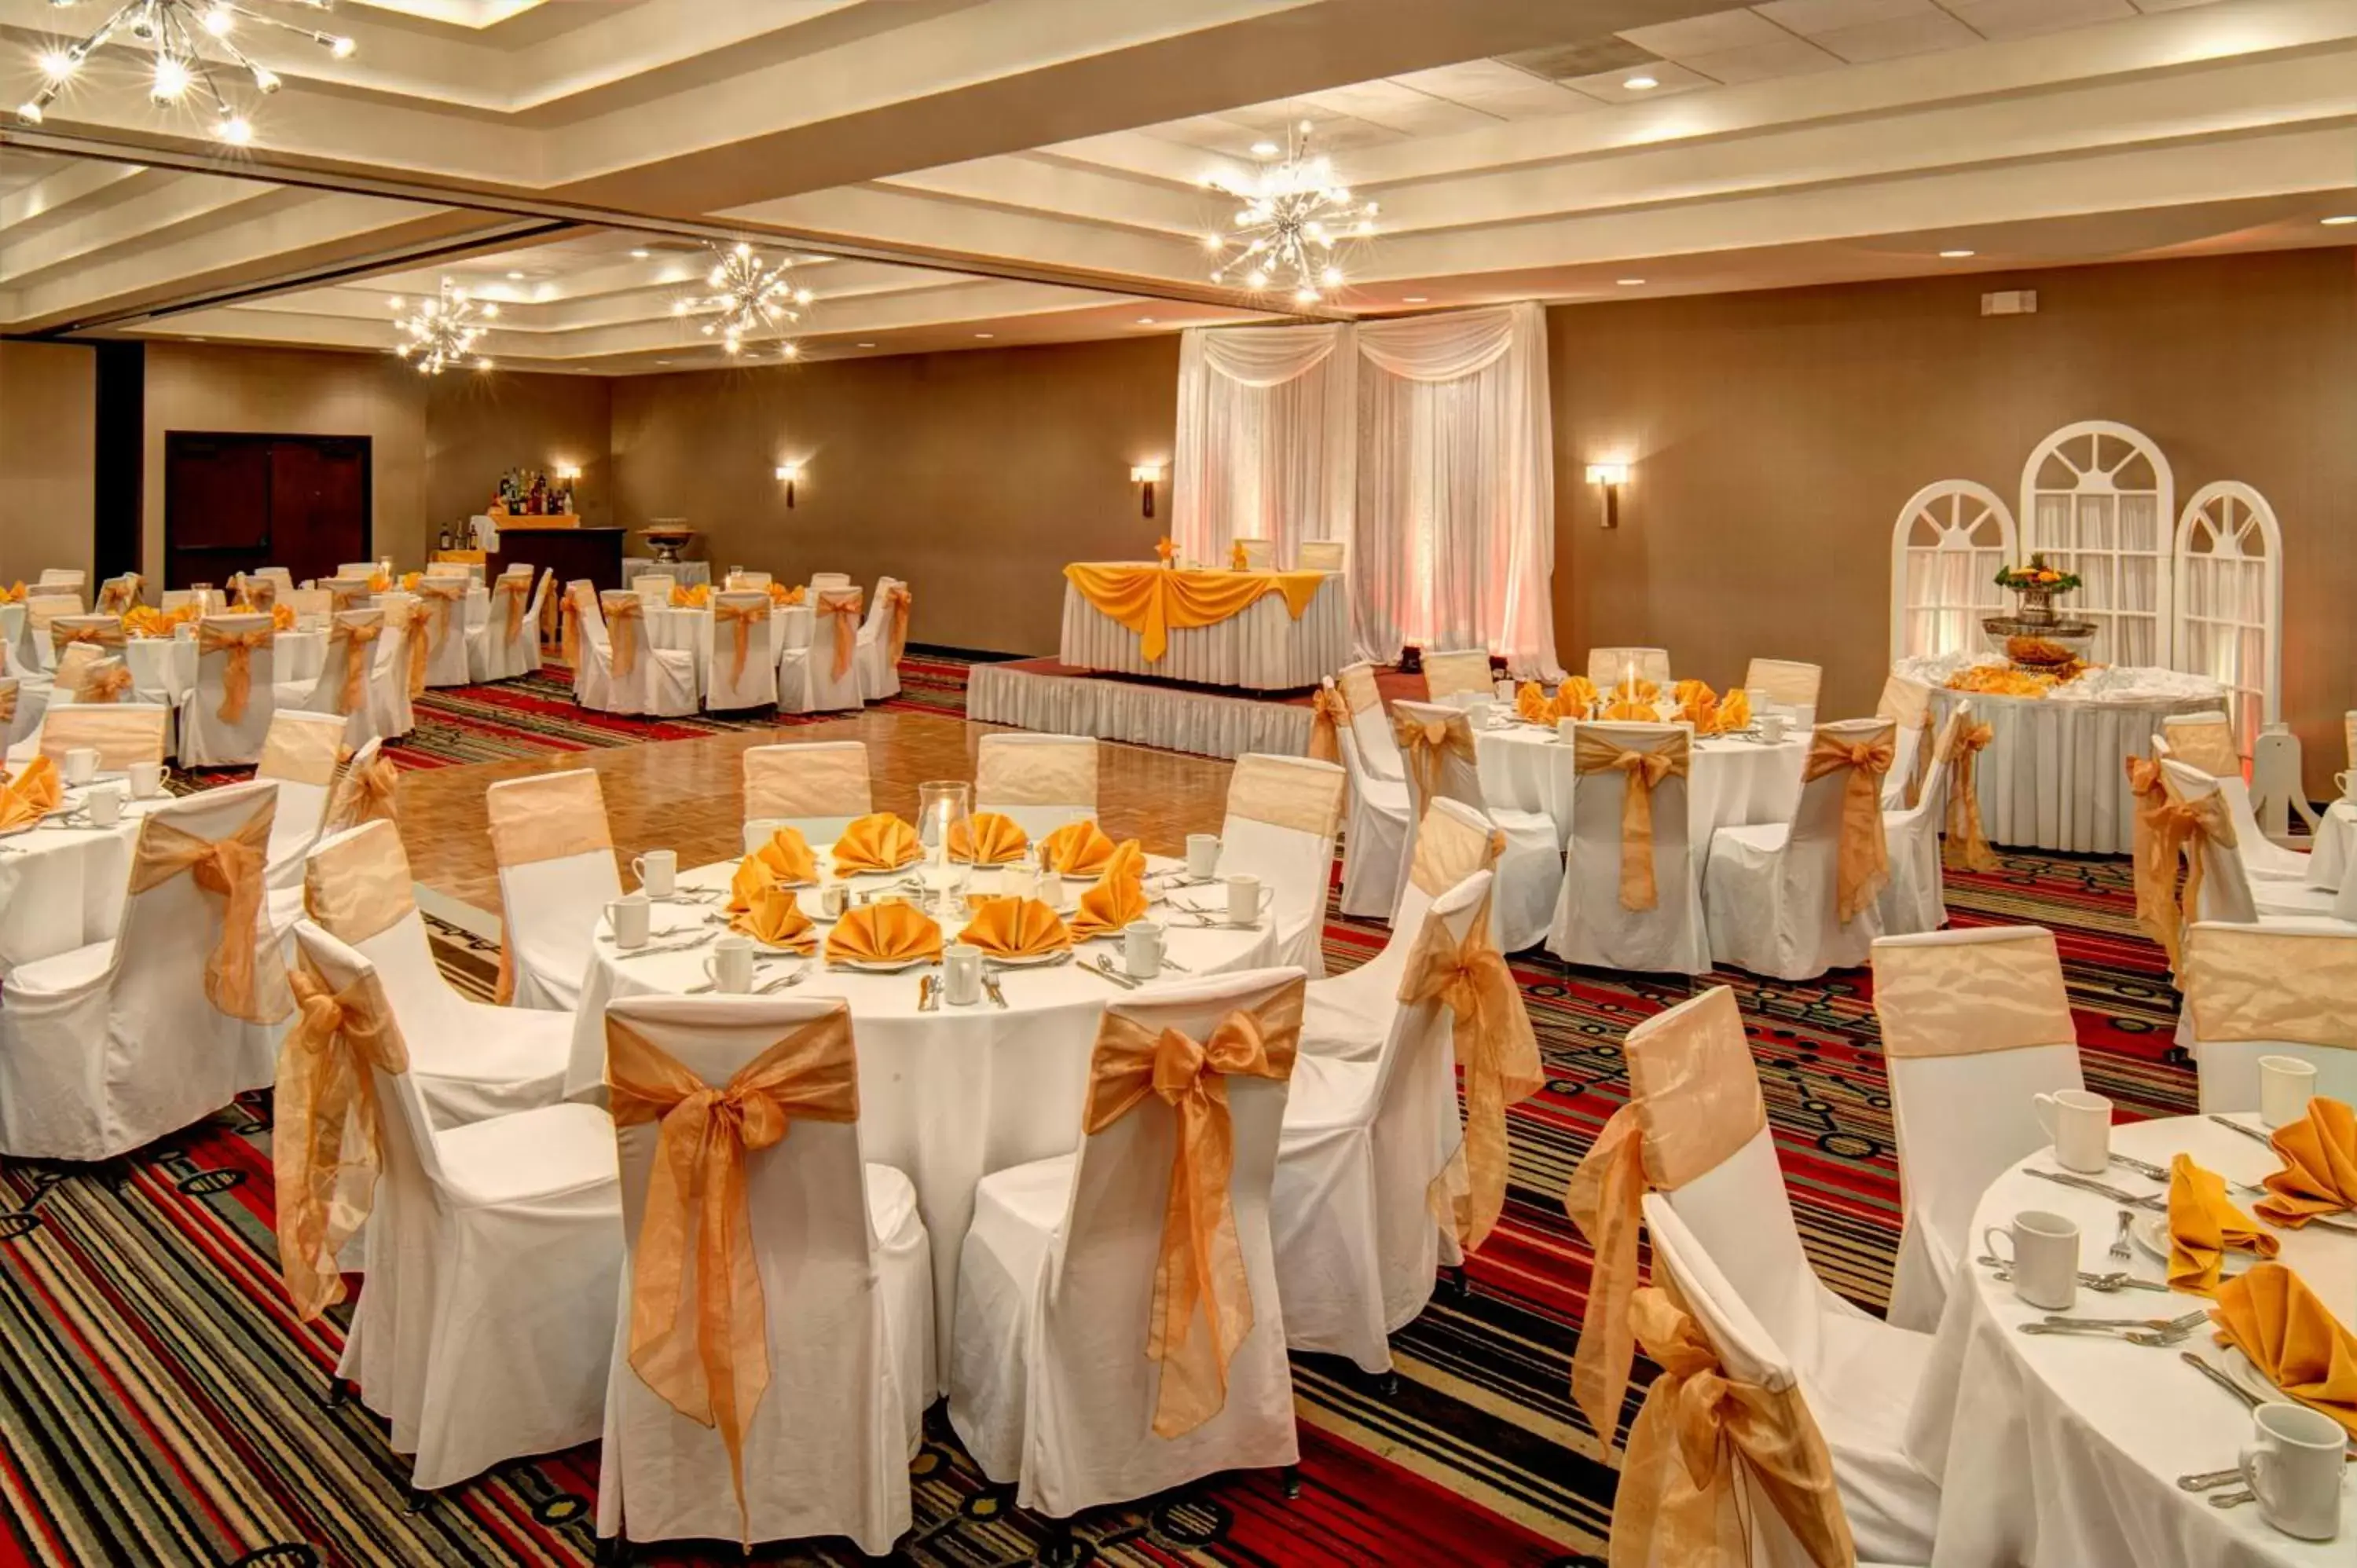 Meeting/conference room, Banquet Facilities in Doubletree by Hilton Buena Park